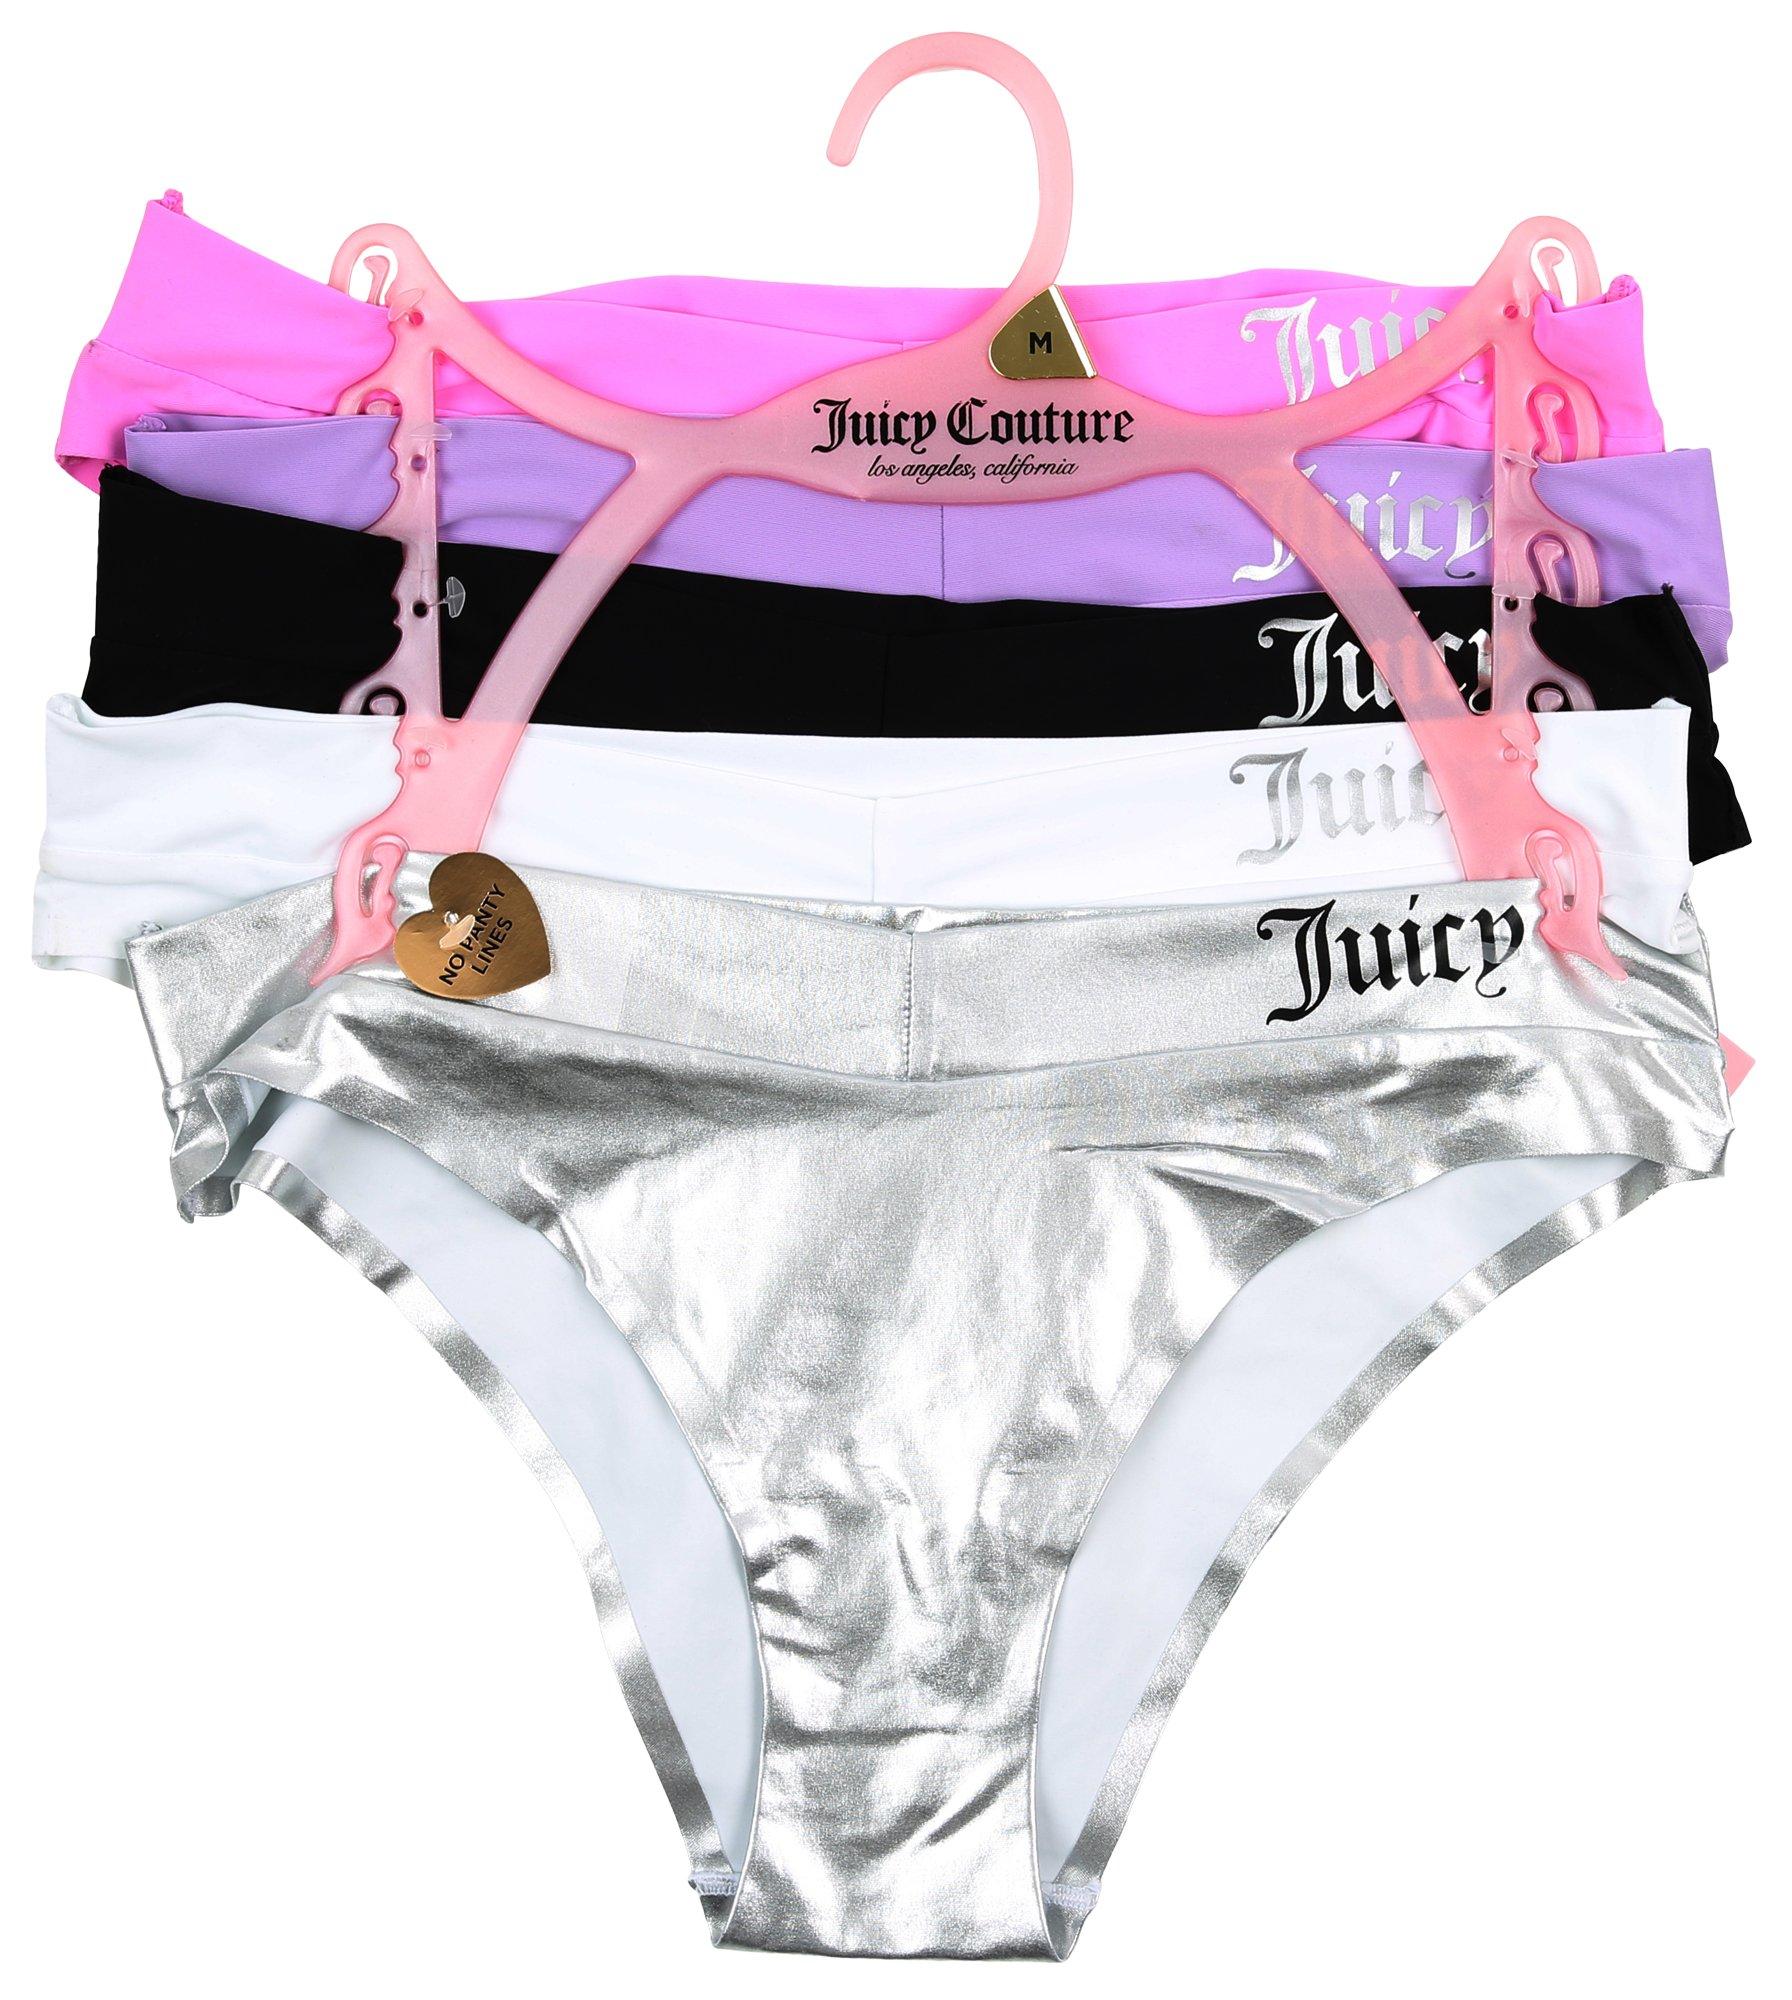 2- JUICY COUTURE Size Intimates 3 PACK Cheeky Panties Underwear 1X